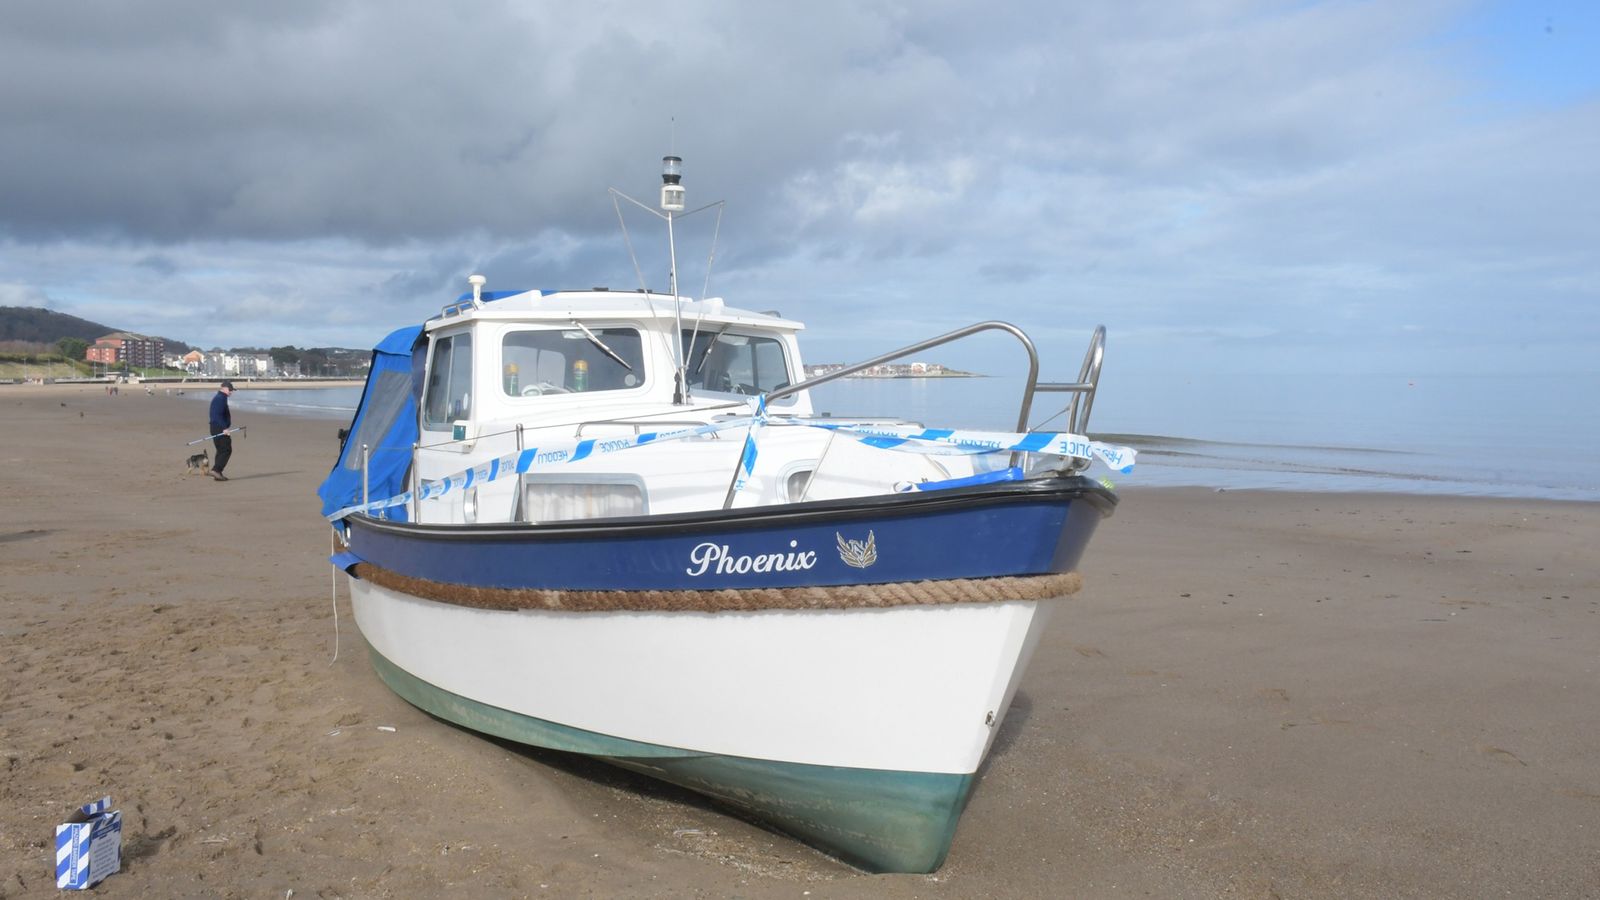 Crewless boat found adrift off North Wales sparks search operation - Sky Sports (Picture 1)